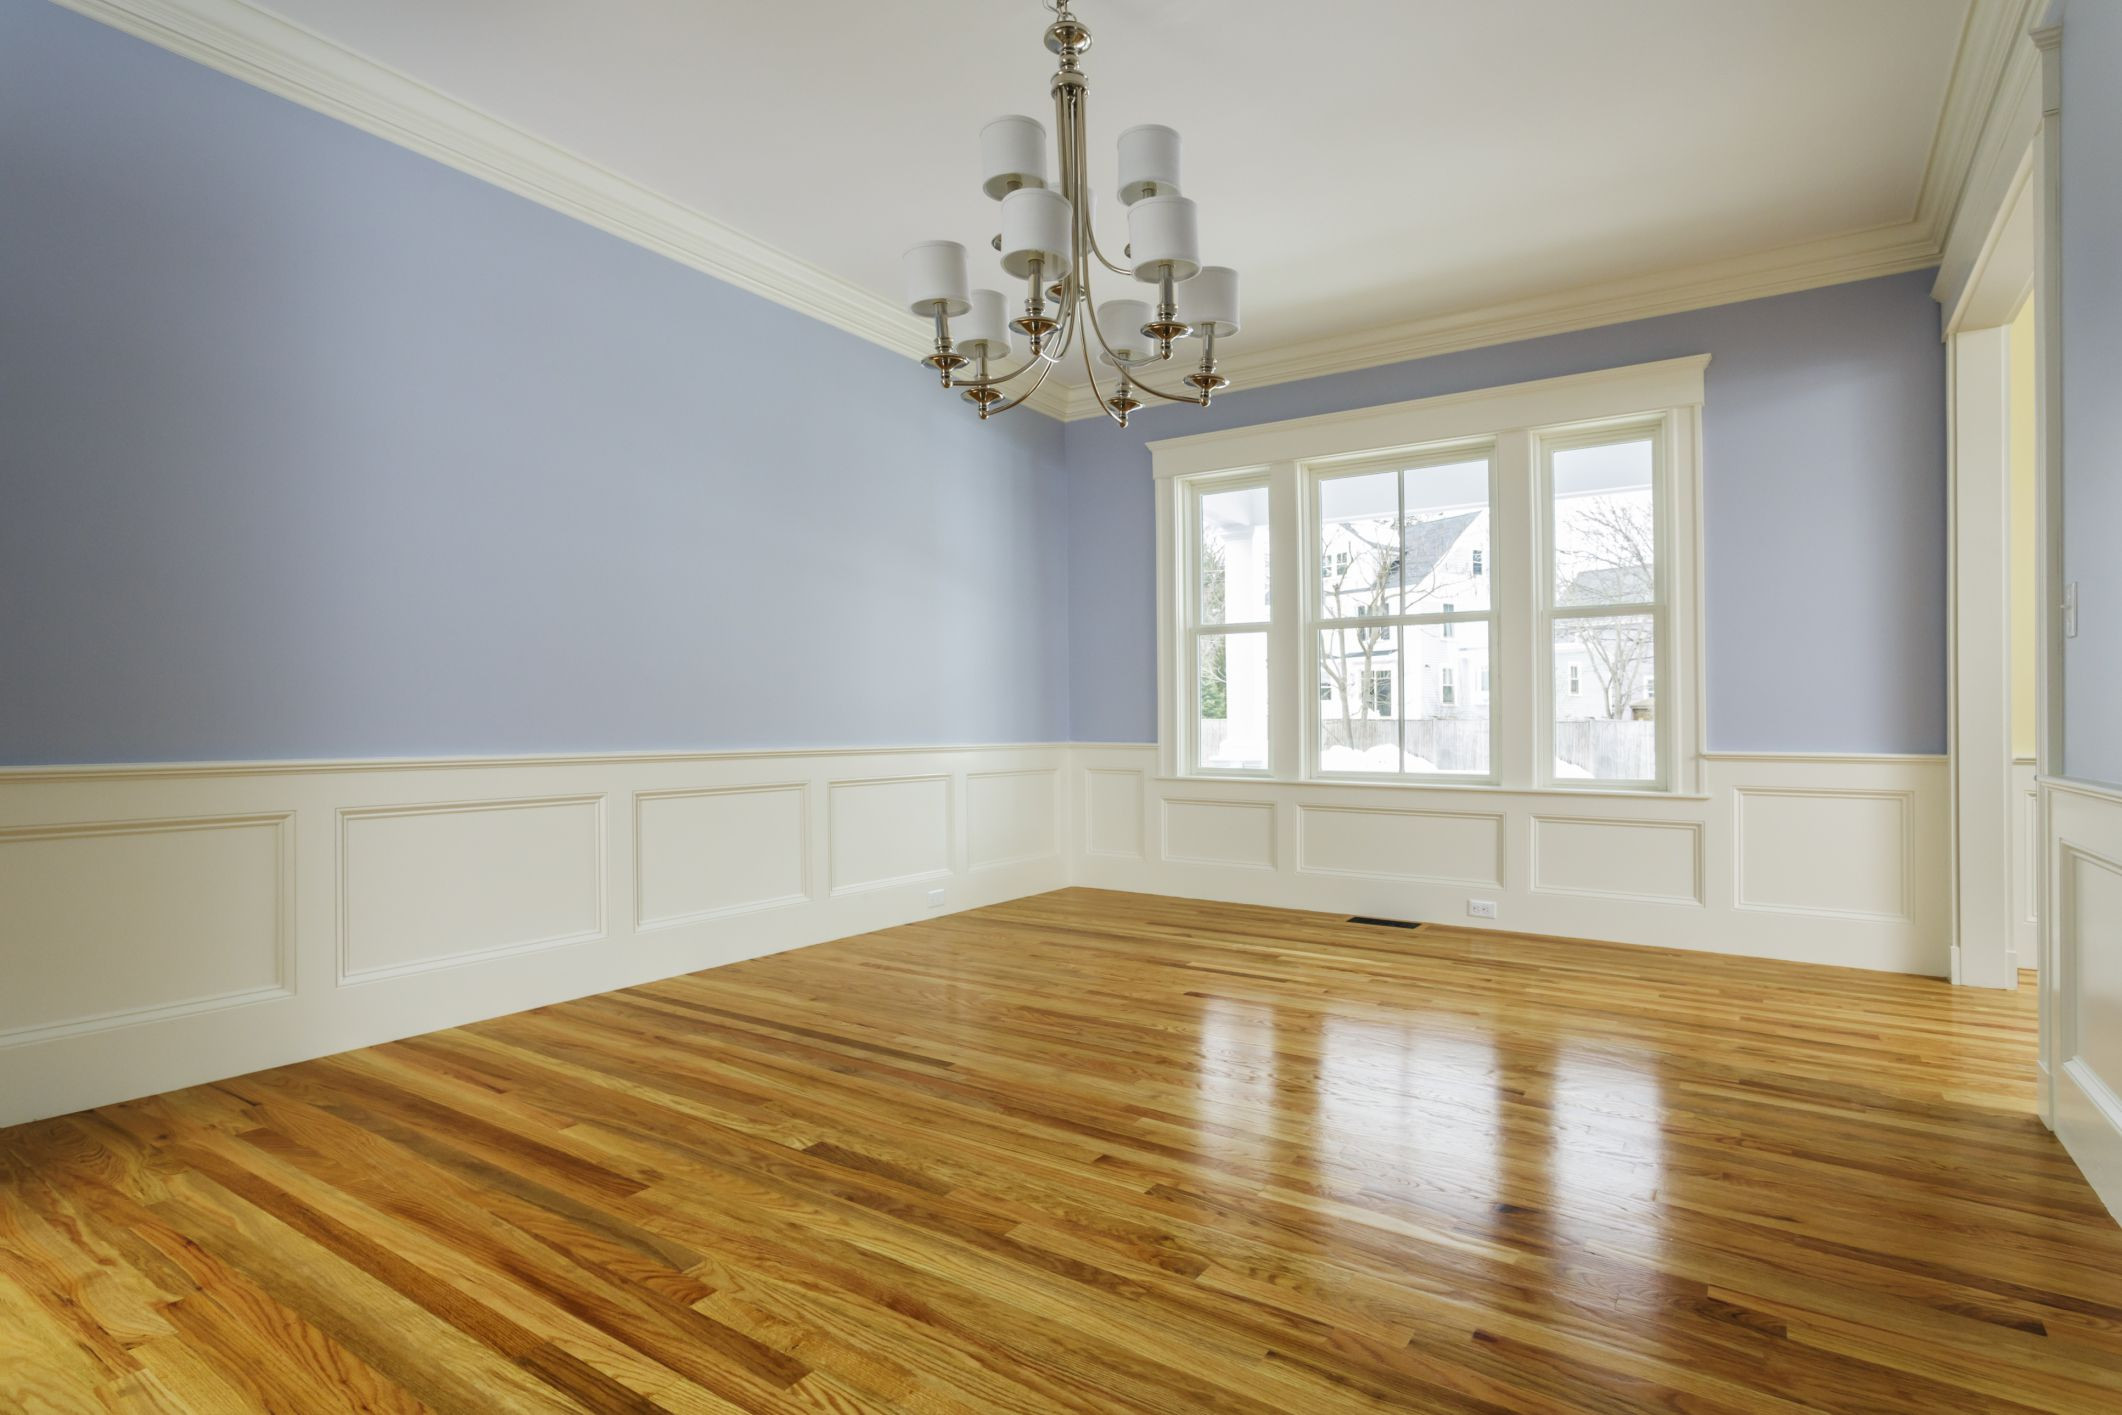 15 Best Can I Stain Hardwood Floors 2024 free download can i stain hardwood floors of the cost to refinish hardwood floors for 168686572 highres 56a2fd773df78cf7727b6cb3